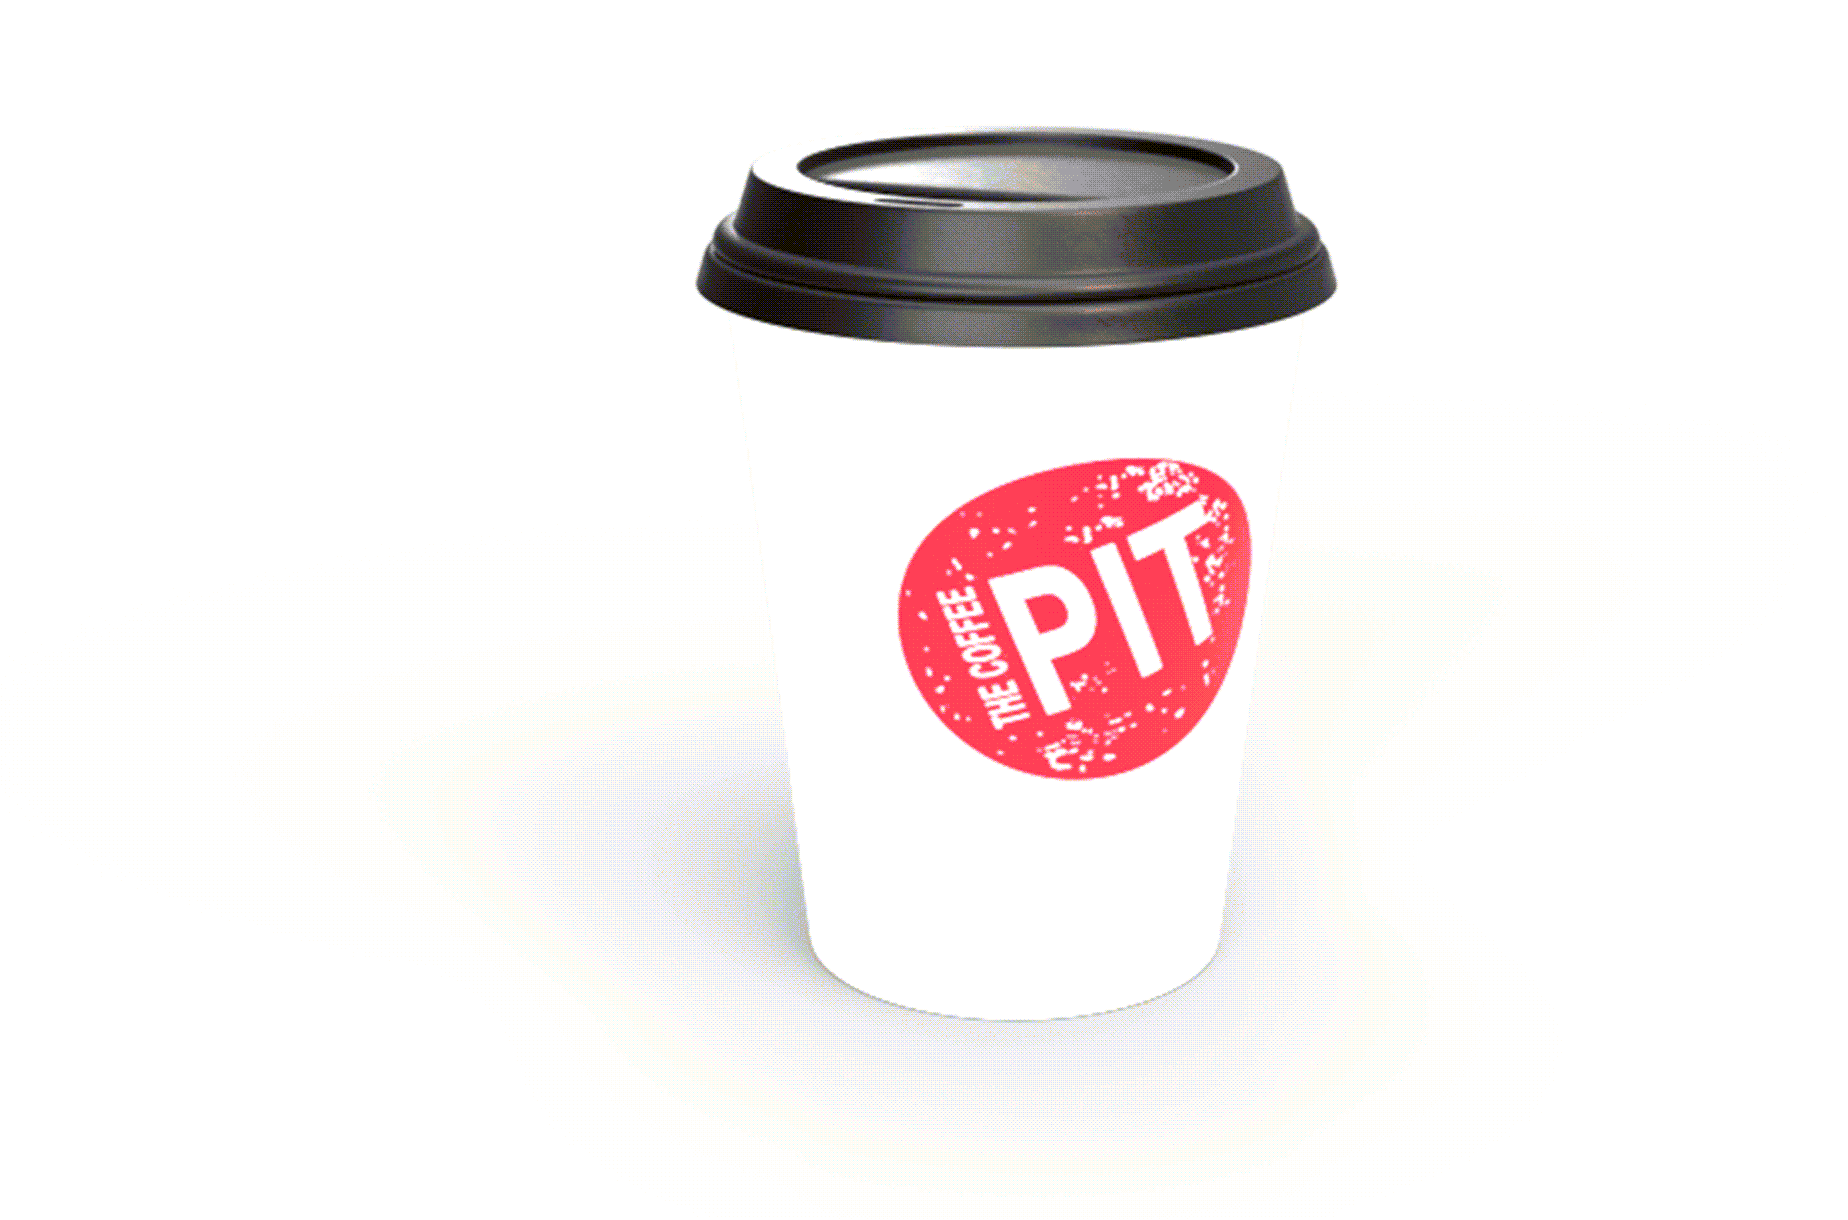 https://www.thecoffeepit.com.au/wp-content/uploads/2018/09/Coffee-cup.png